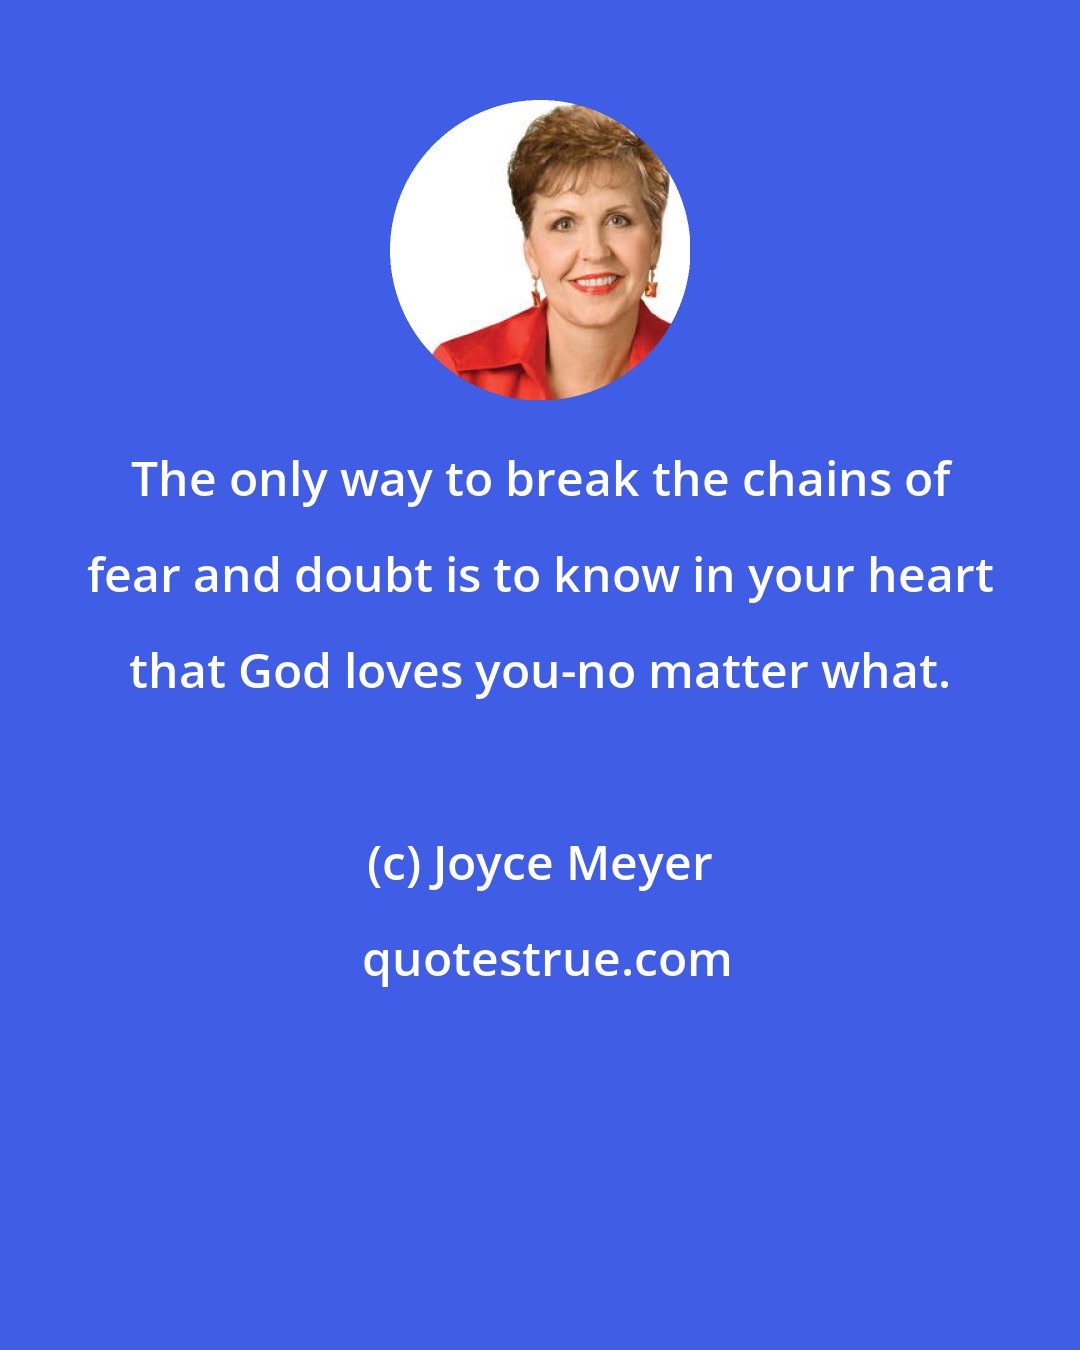 Joyce Meyer: The only way to break the chains of fear and doubt is to know in your heart that God loves you-no matter what.